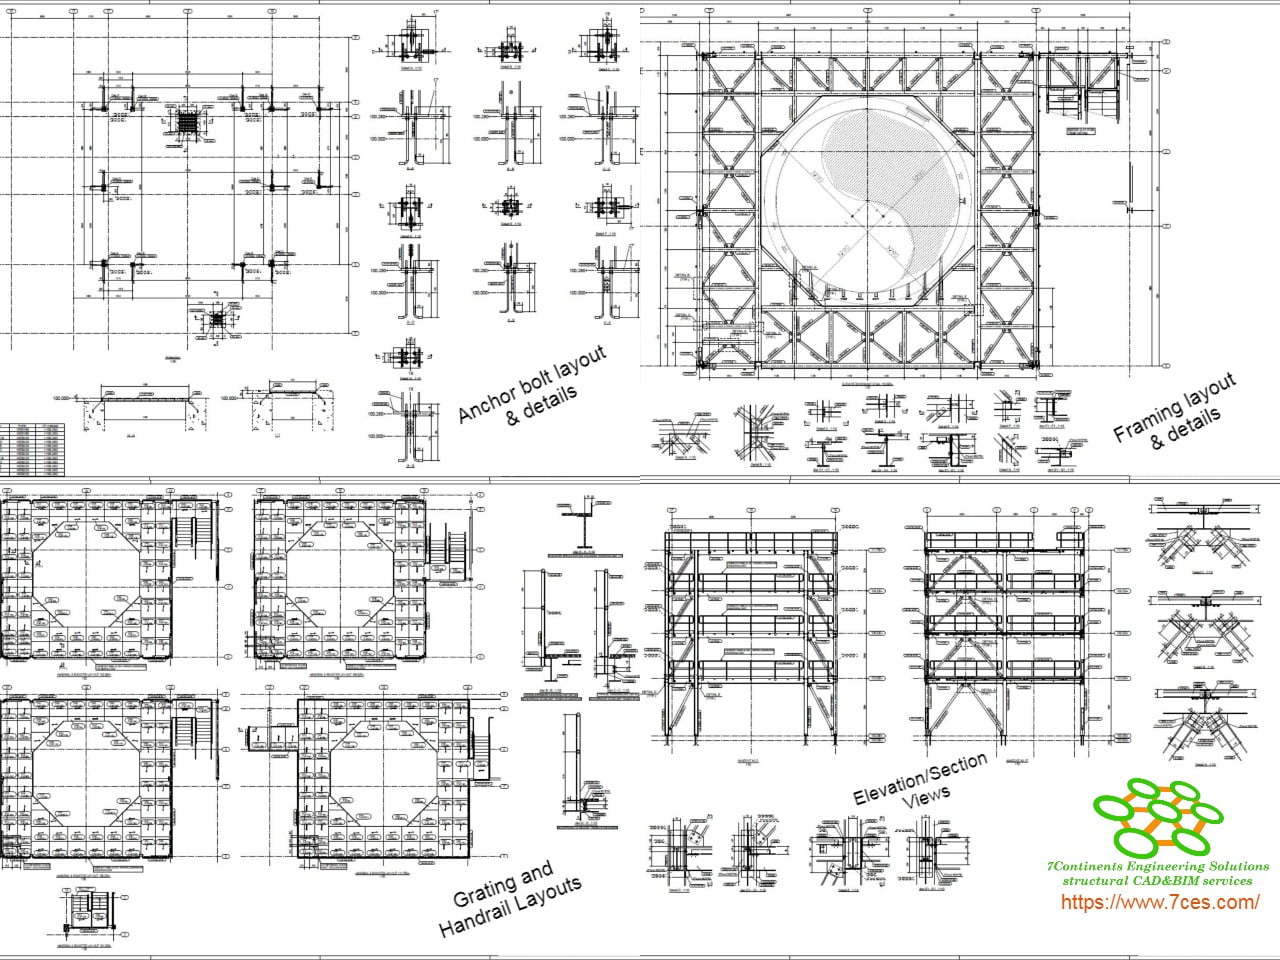 Using The Aisc Steel Building Case Study In A Structural Engineering Course  Sequence